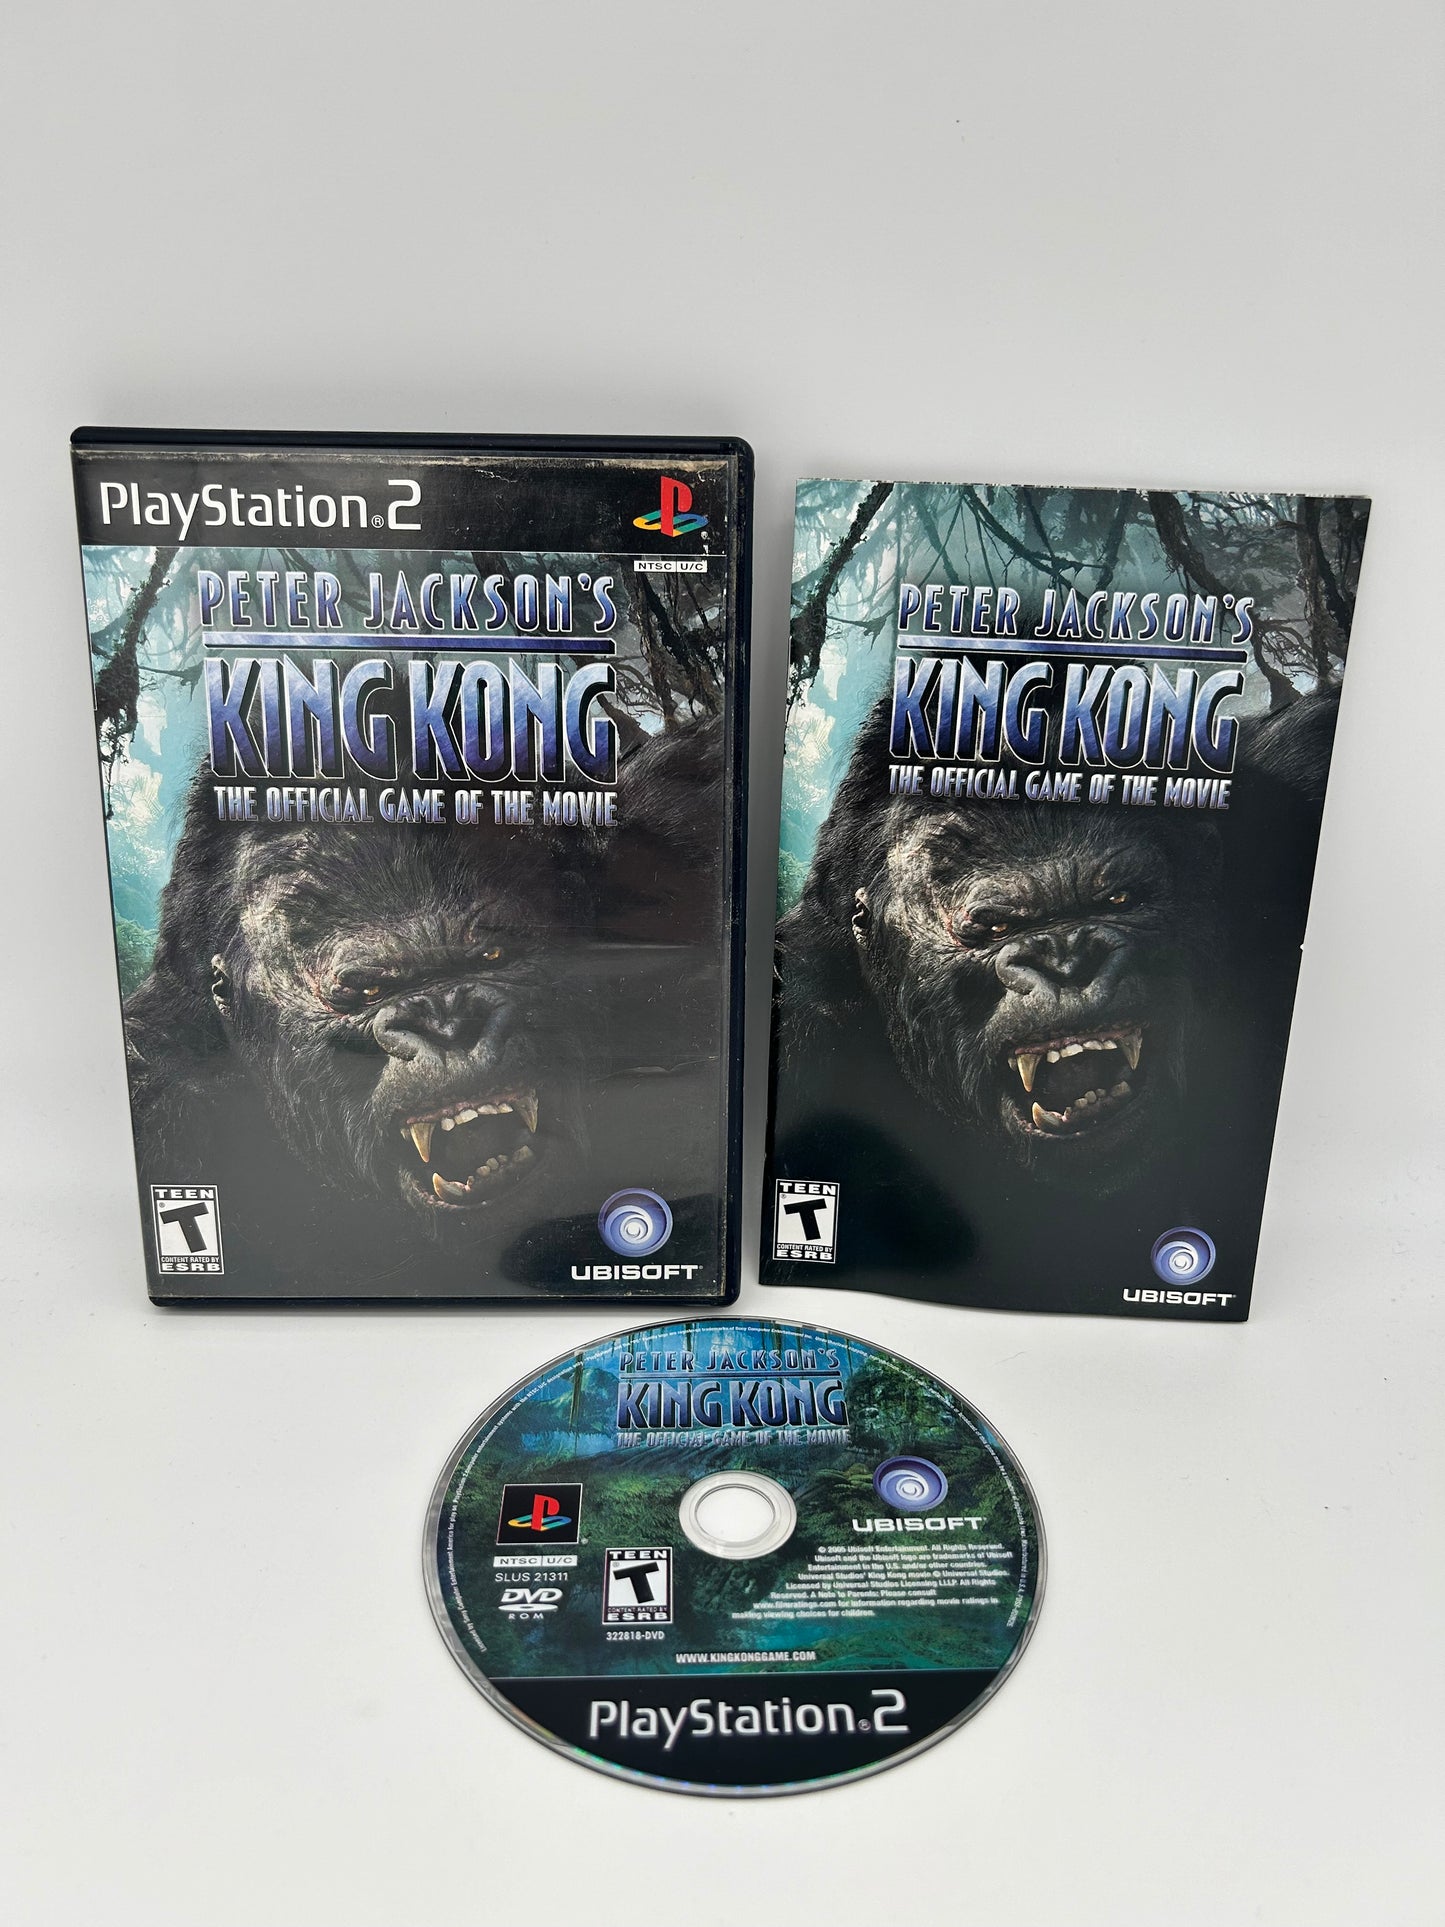 PiXEL-RETRO.COM : SONY PLAYSTATION 2 (PS2) COMPLET CIB BOX MANUAL GAME NTSC PETER JACKSONS KiNG KONG THE OFFiCiAL GAME OF THE MOViE